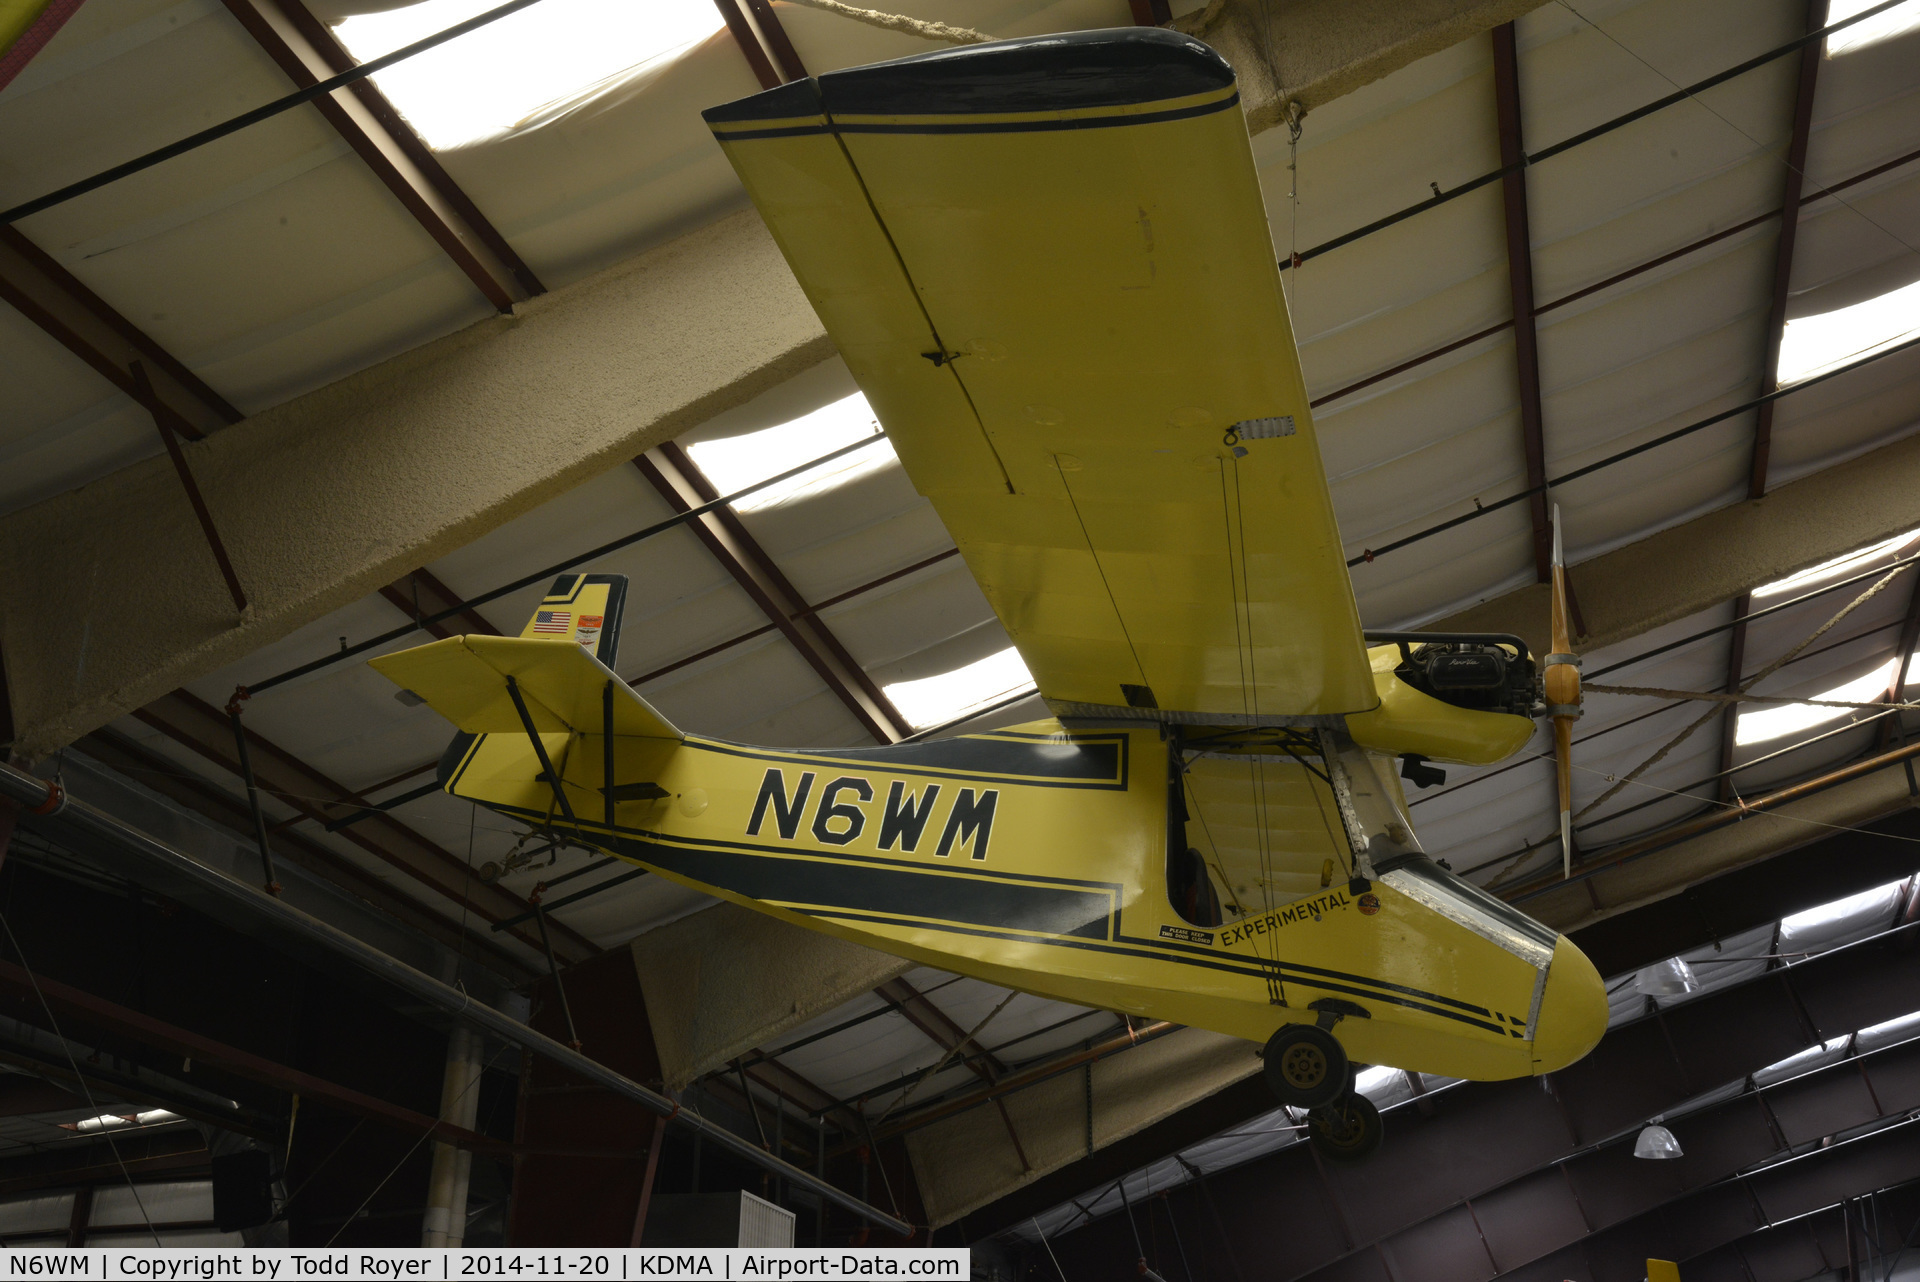 N6WM, Flaglor Sky Scooter C/N 121536, On display at the Pima Air and Space Museum